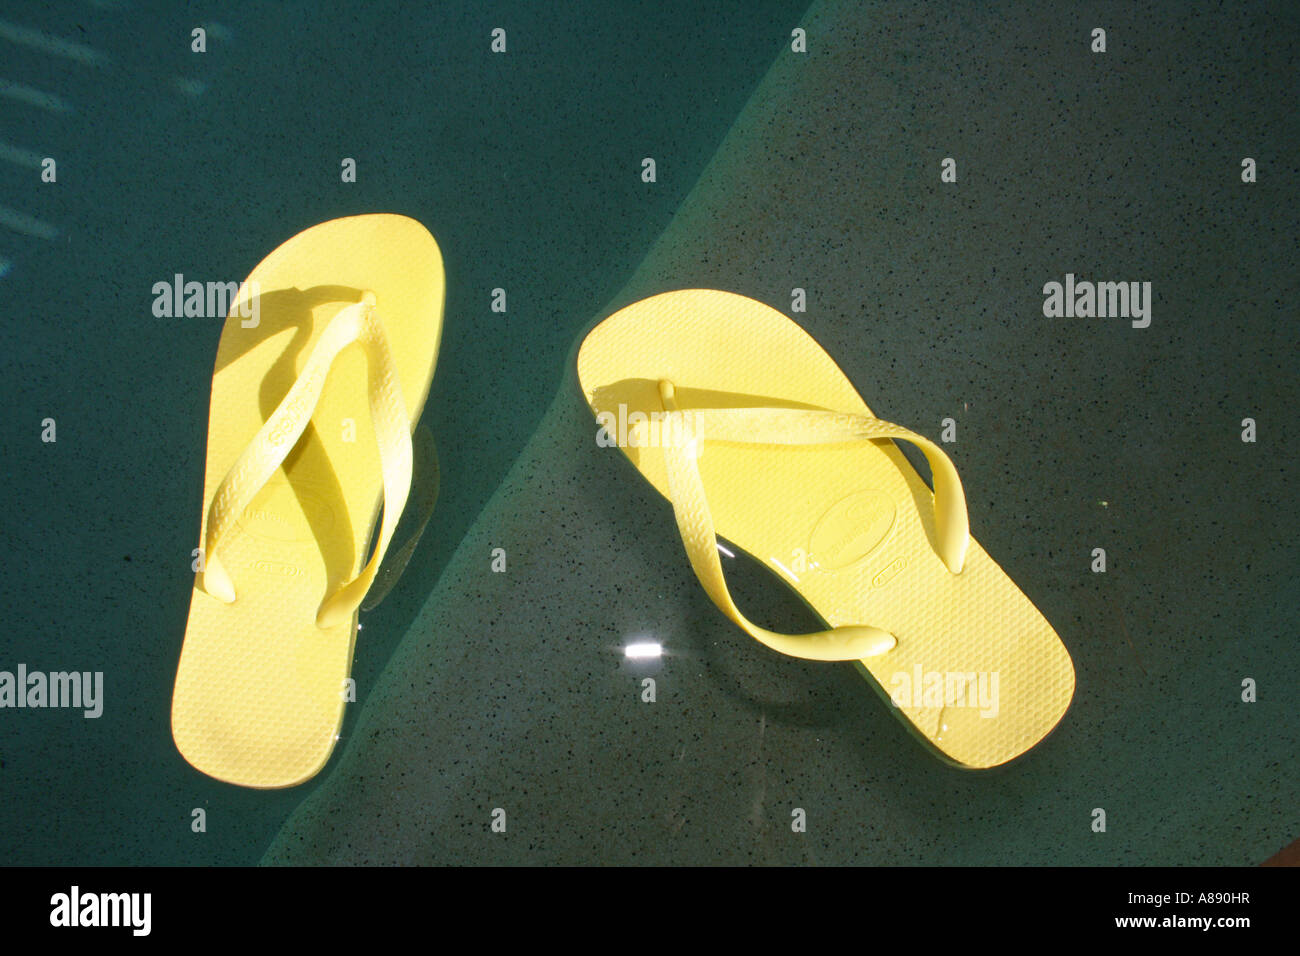 A PAIR OF THONGS BY A POOL BDA10600 Stock Photo - Alamy